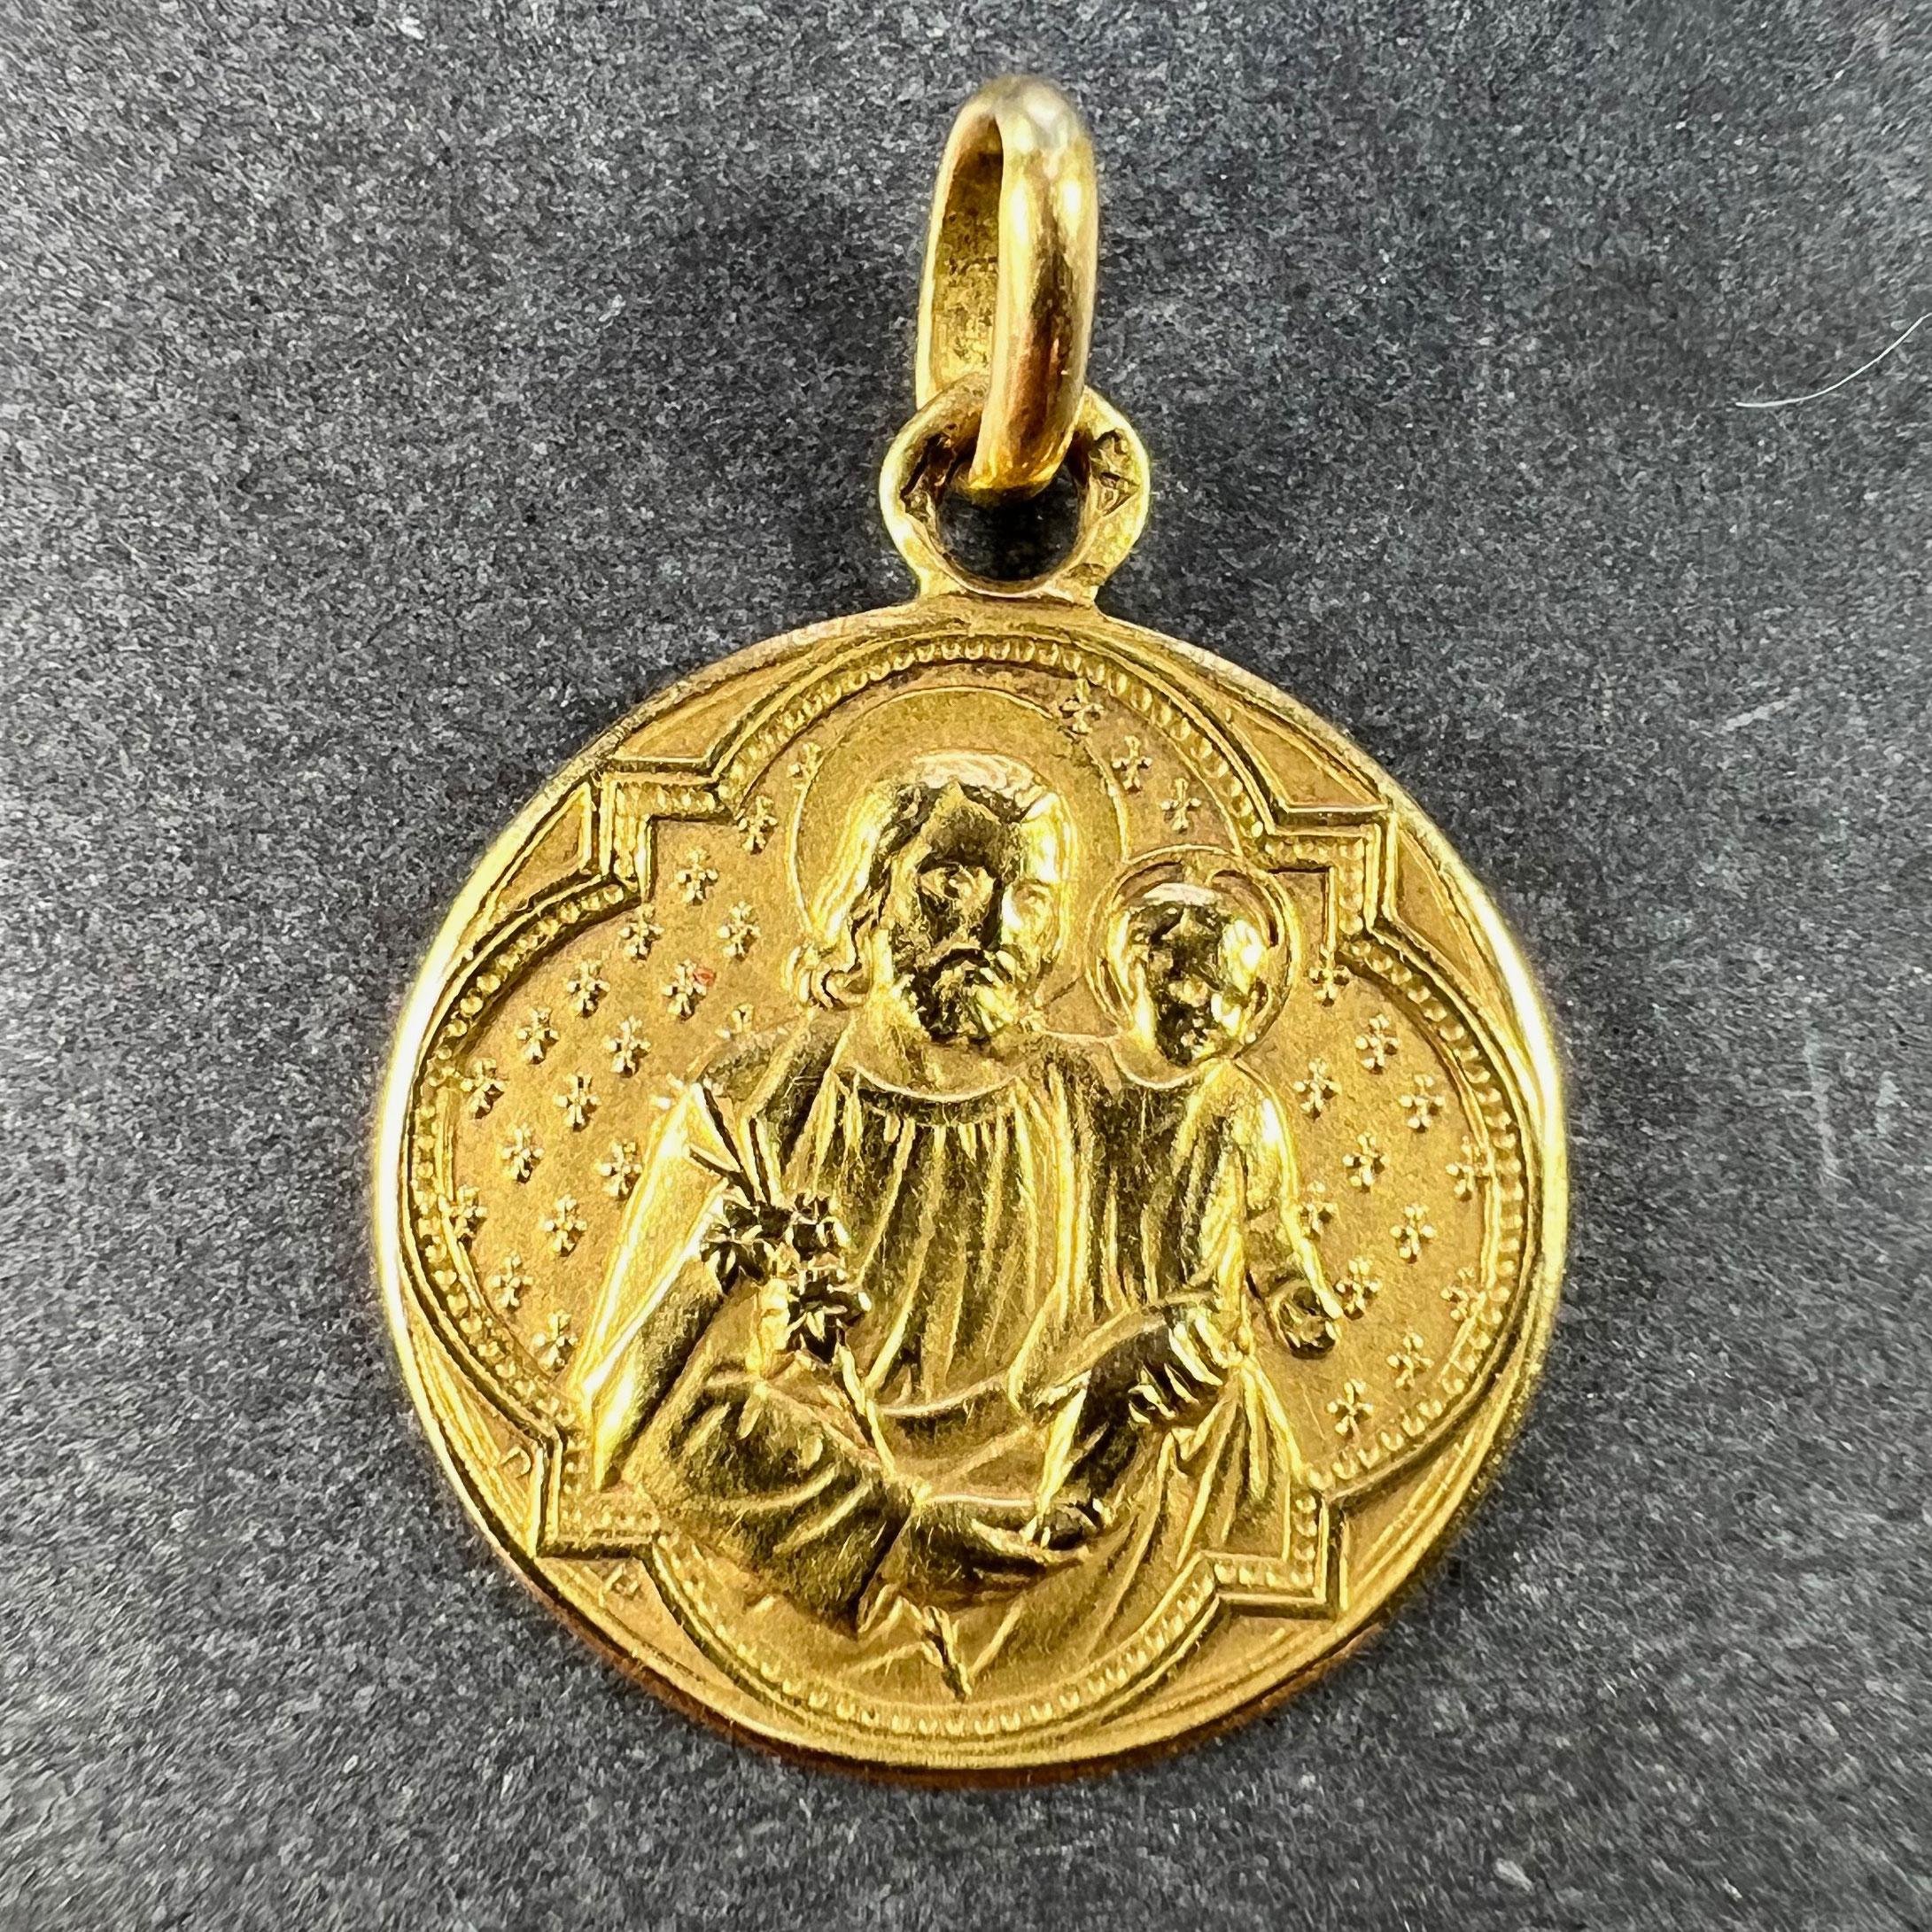 A French 18 karat (18K) yellow gold charm pendant designed as a round medal depicting Saint Joseph with the infant Jesus Christ within a Gothic frame. The same Gothic frame to the reverse and engraved 'Jean-Joseph'. Stamped with the eagle’s head